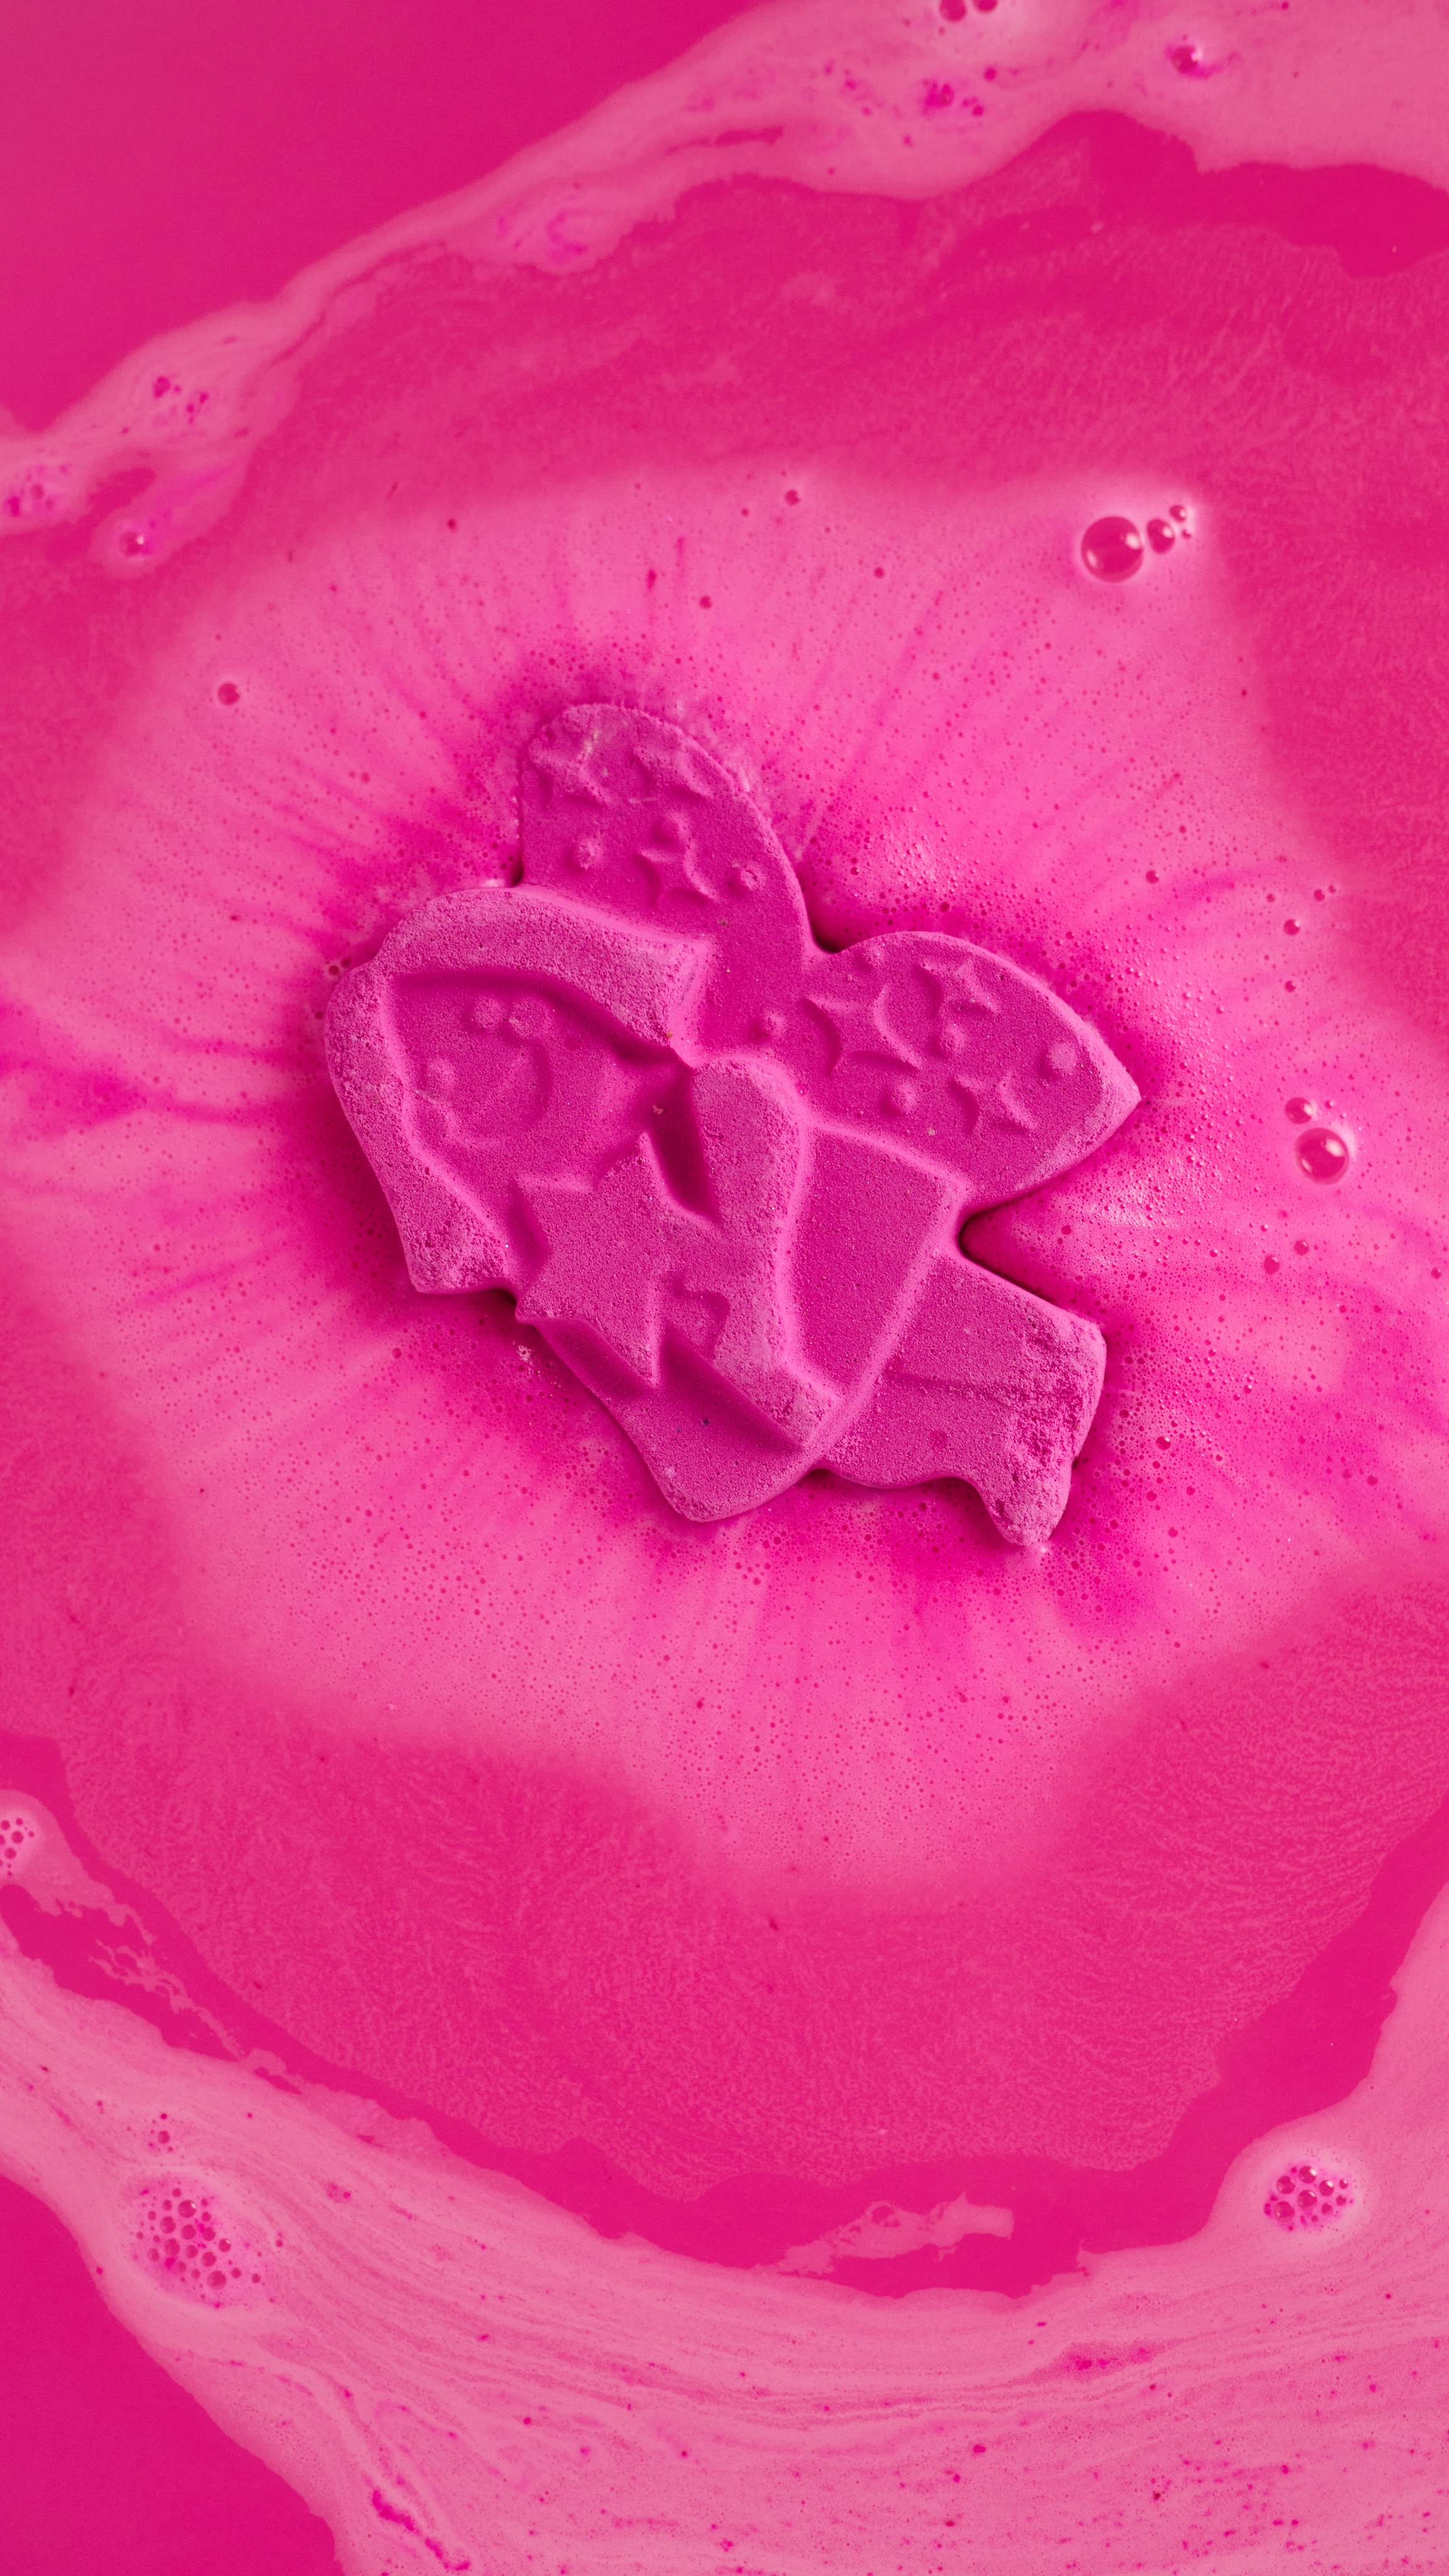 Groovy Fairy bath bomb is melting into the bath water creating layers of deep pink, foamy swirls.